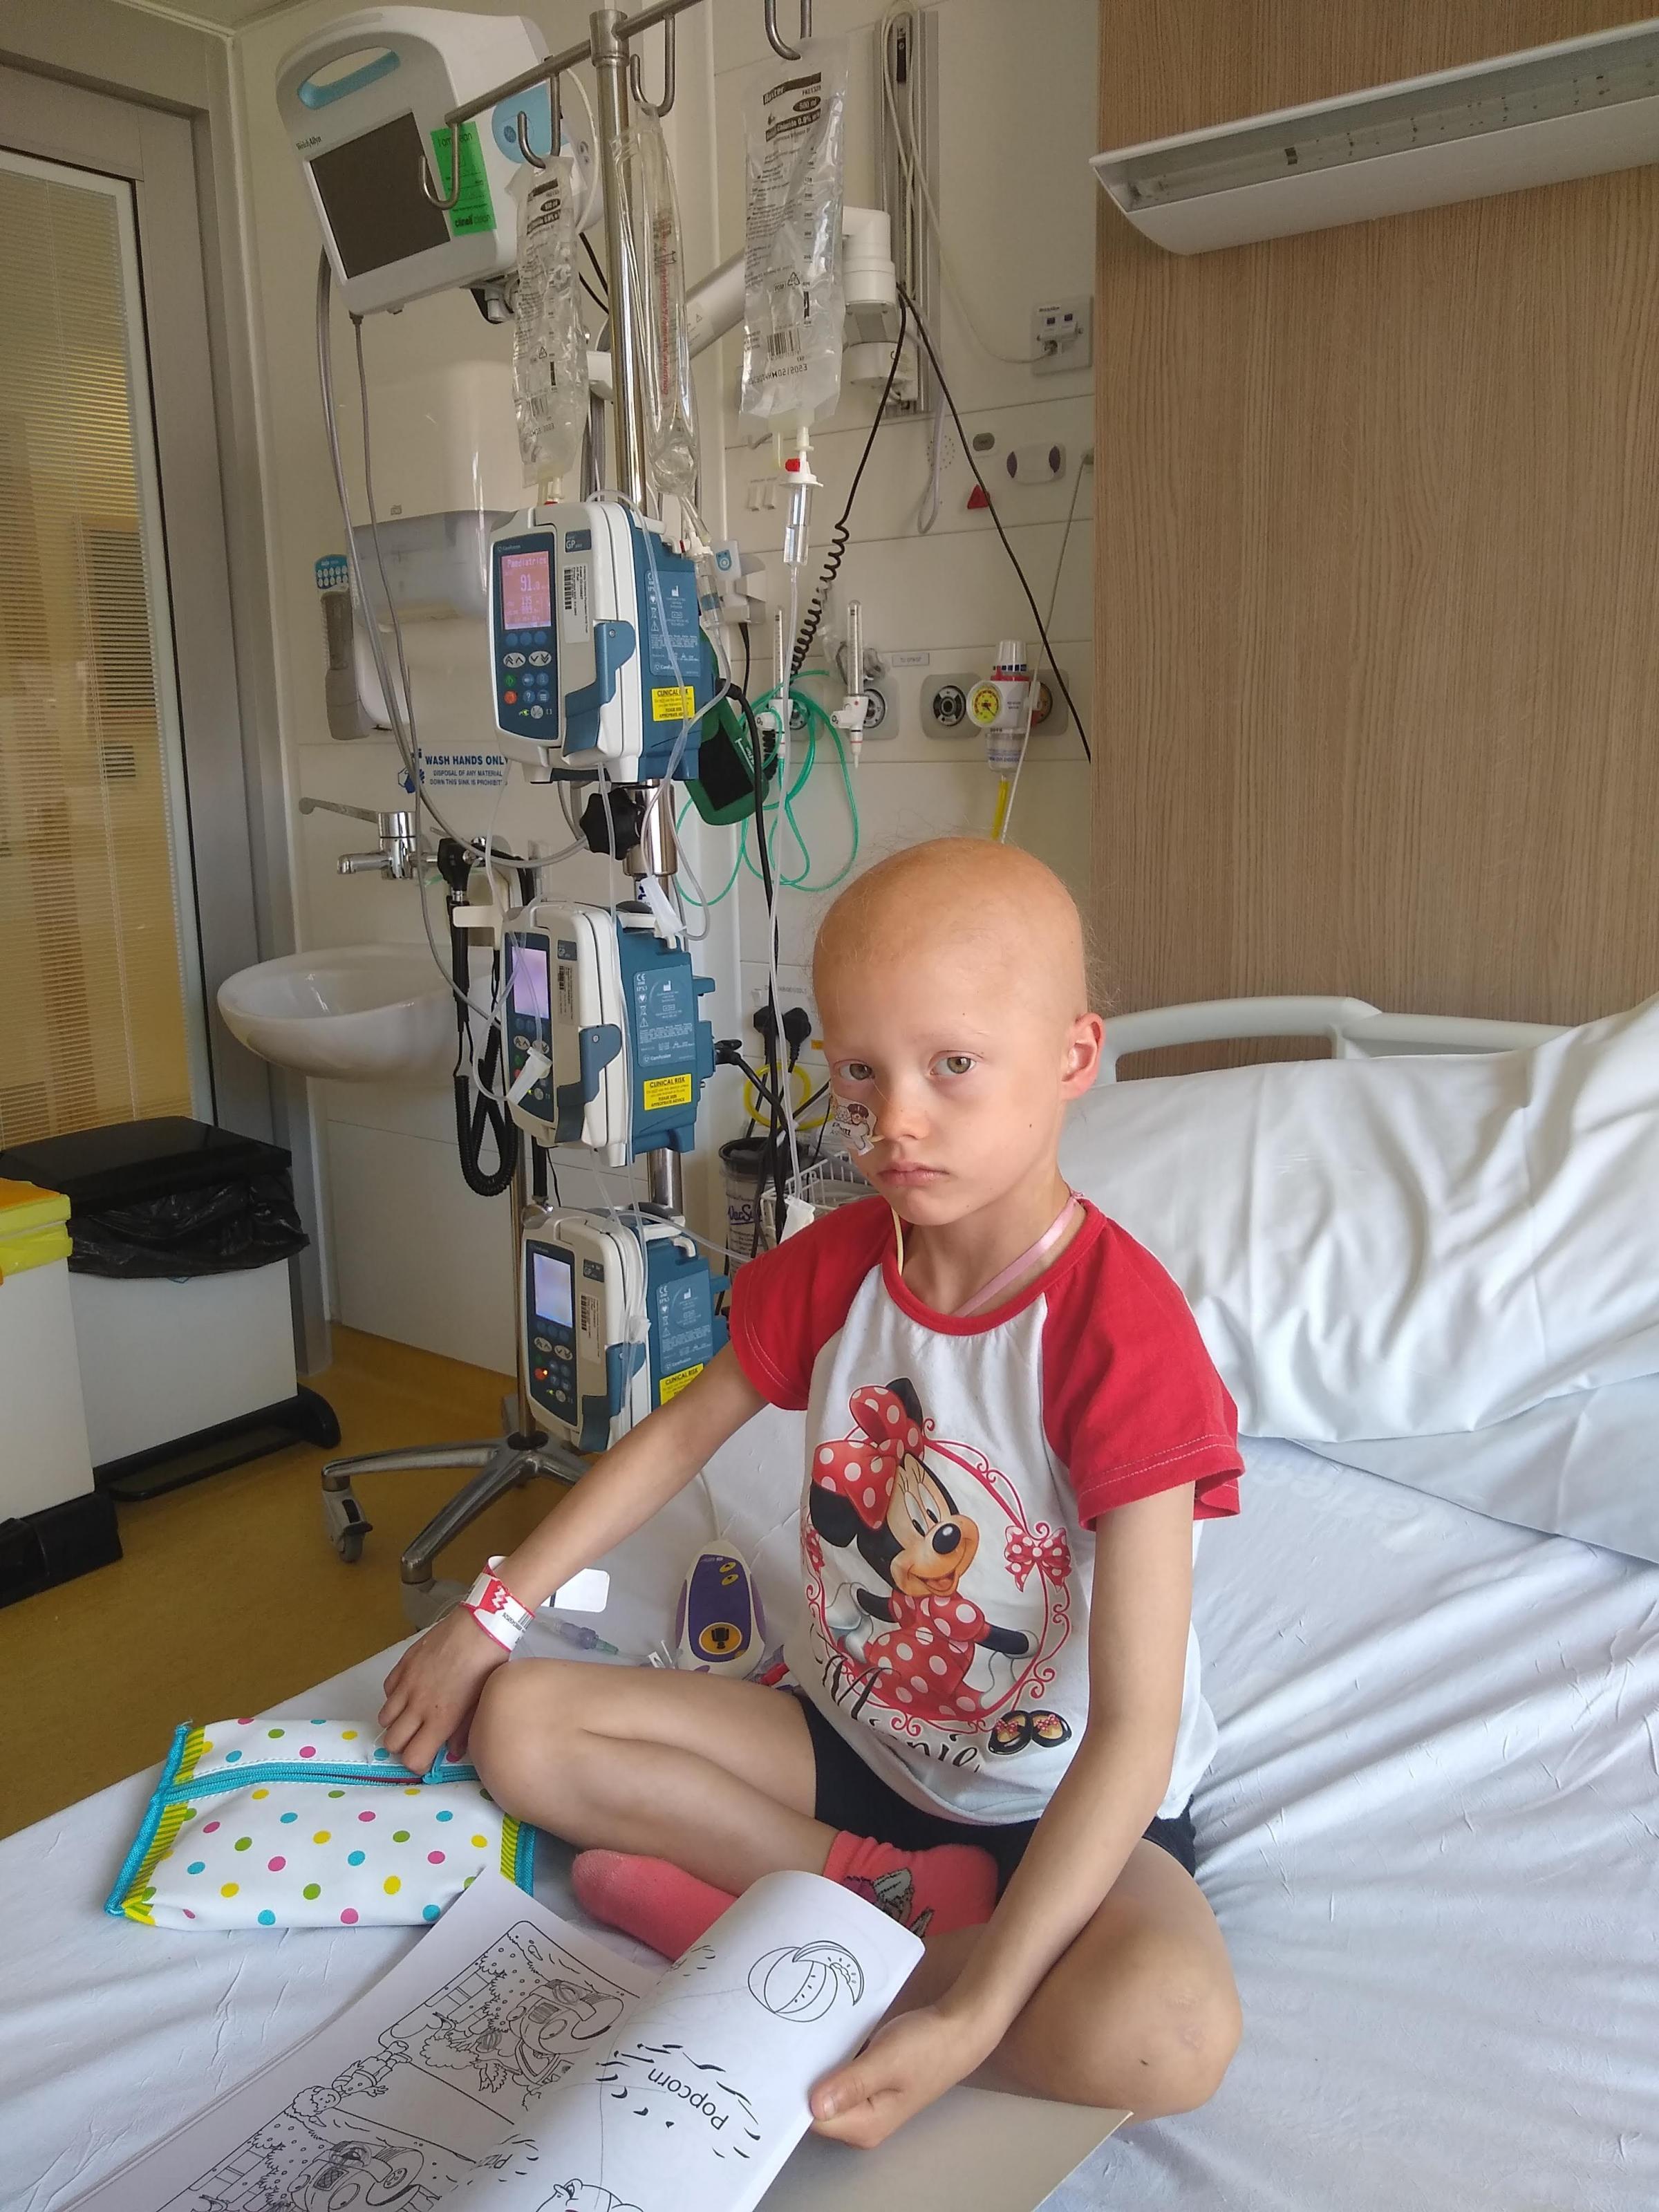 Indeg at Alder Hey during chemotherapy, June 2021. SWNS